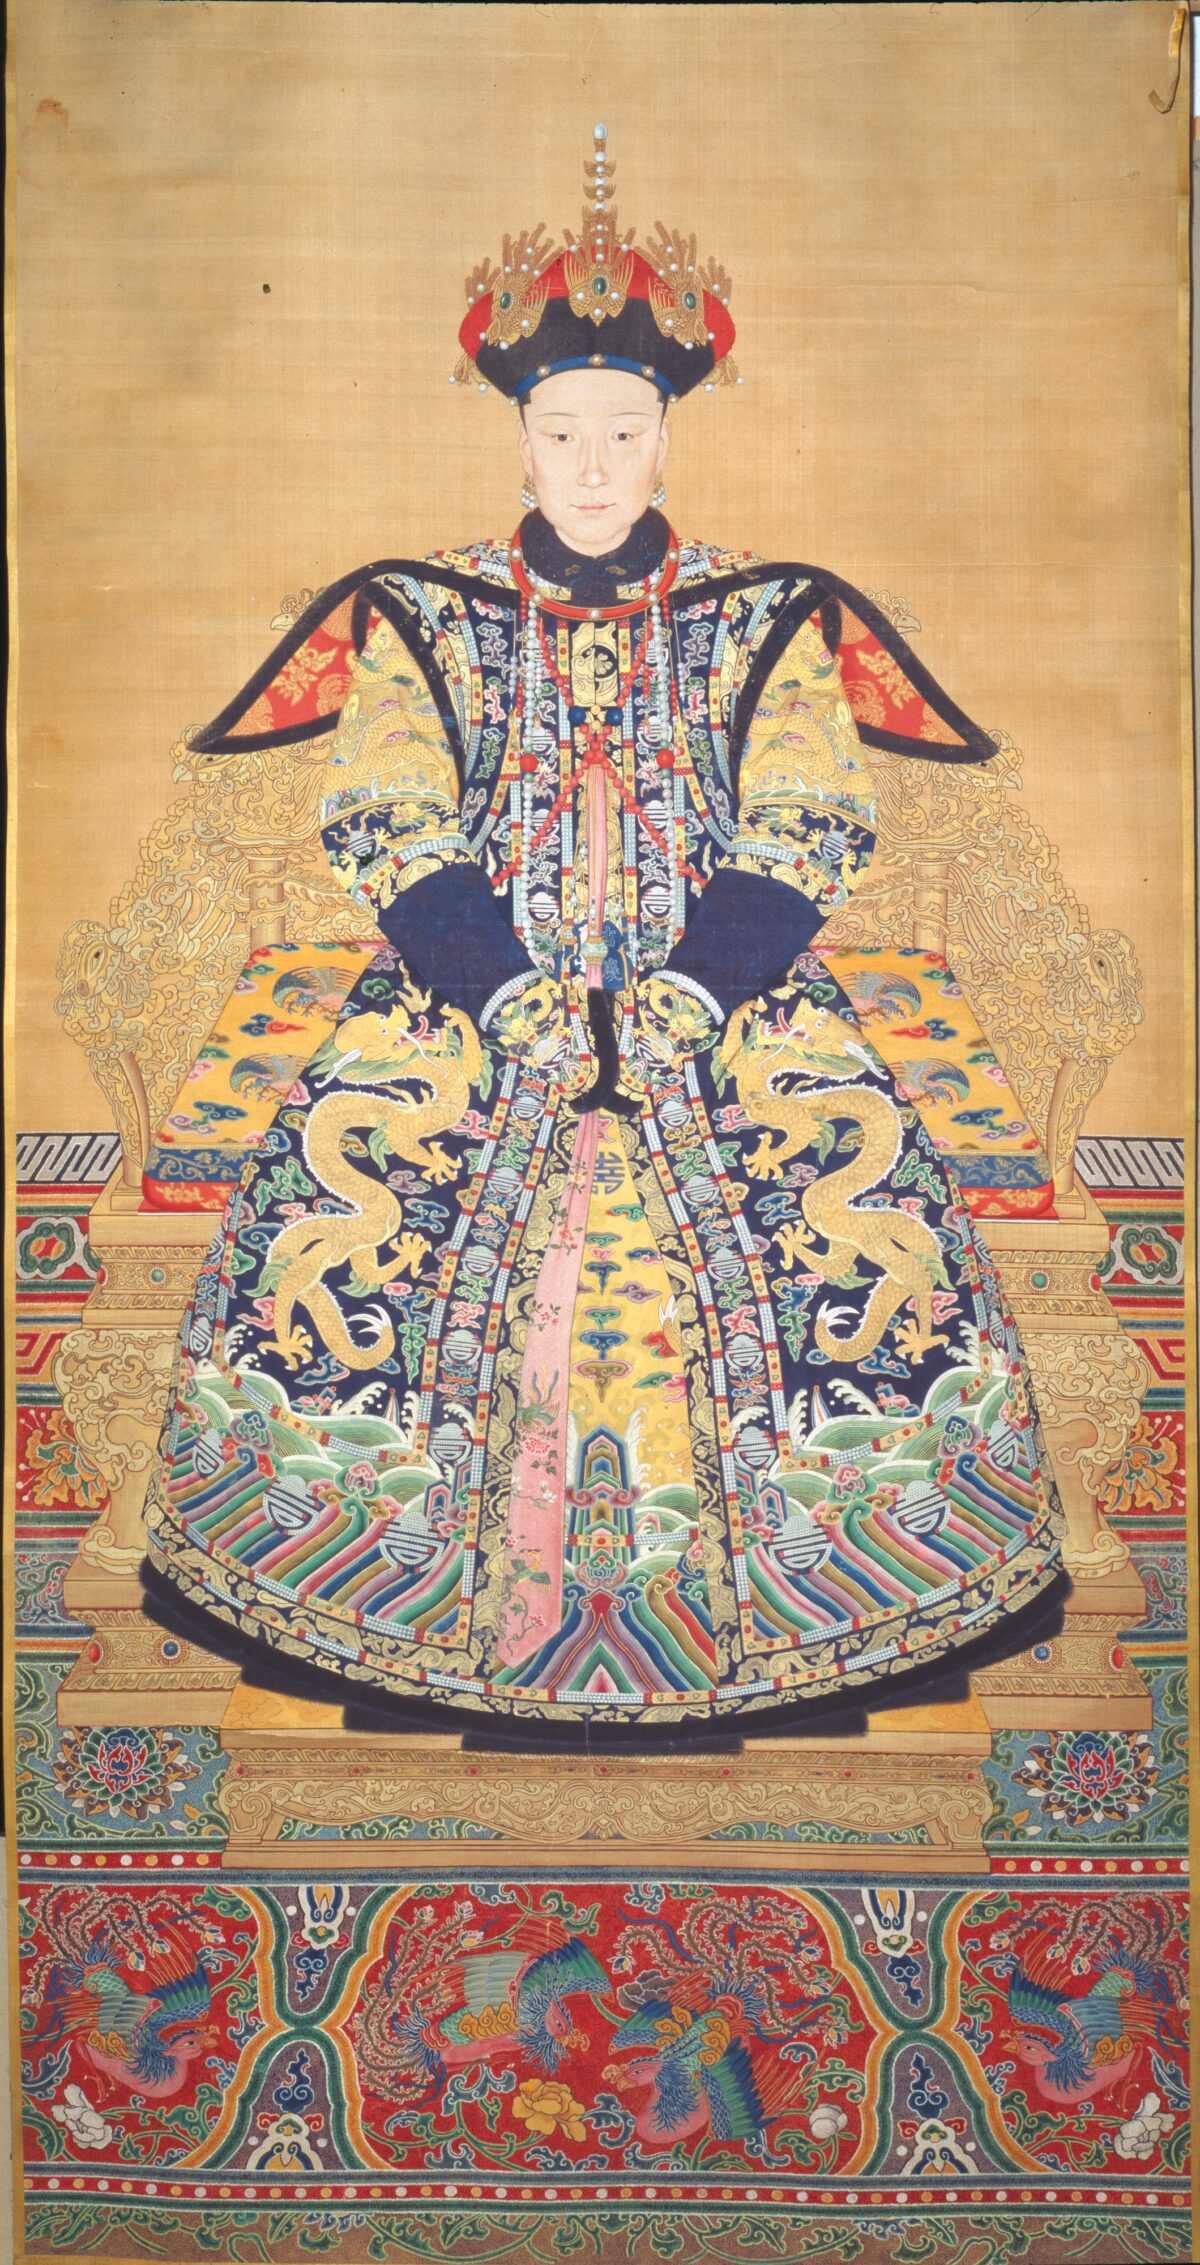 Court painting workshop, Beijing, China
Portrait of an empress, possibly Xiaoxianchun, wife of Emperor Qianlong
Ink and color on silk
108 1/4 x 51 9/16 inches (275 x 131 cm)
Gift of Mrs. Elizabeth Sturgis Hinds, 1956.
(Peabody Essex Museum)